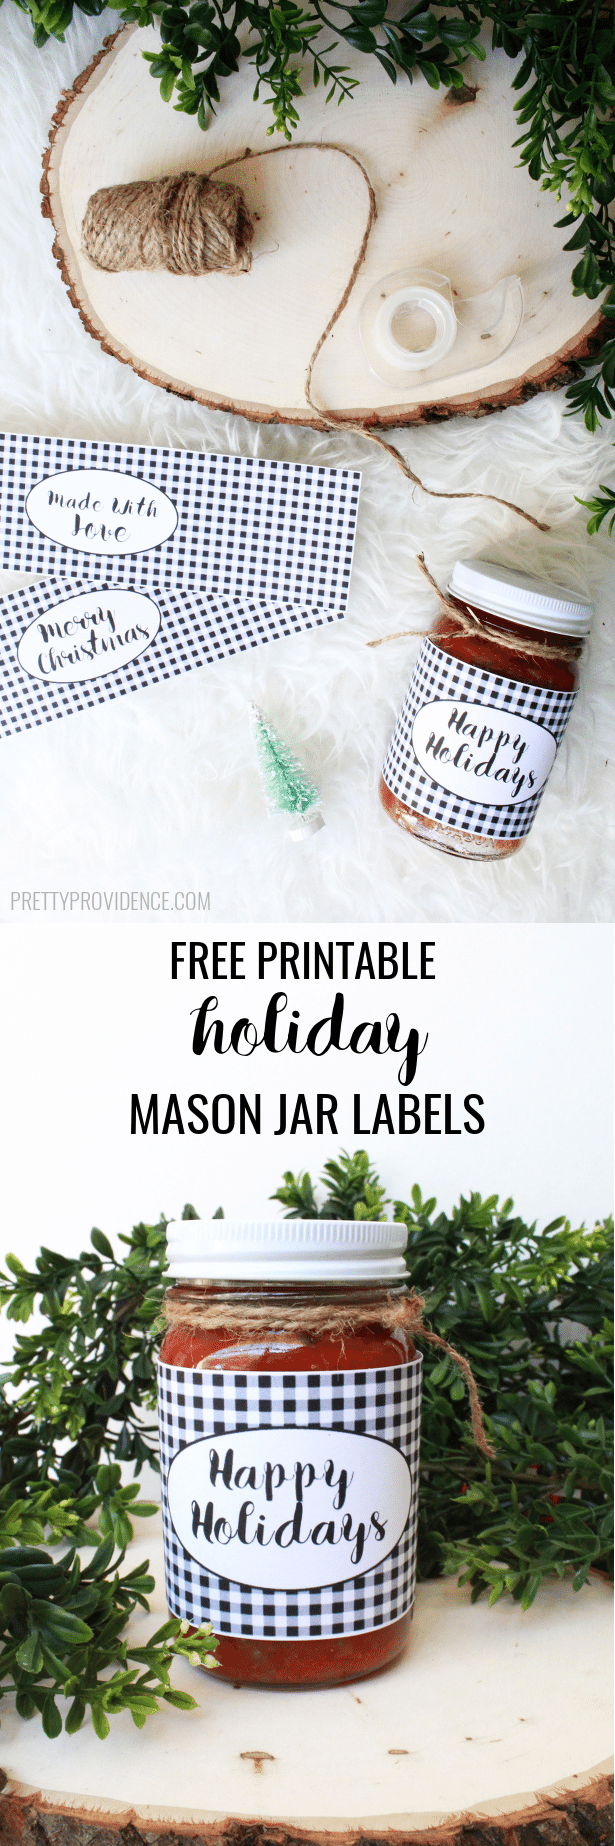 Printable Mason Jar Labels from Pretty Providence for Bake Craft Sew Decorate